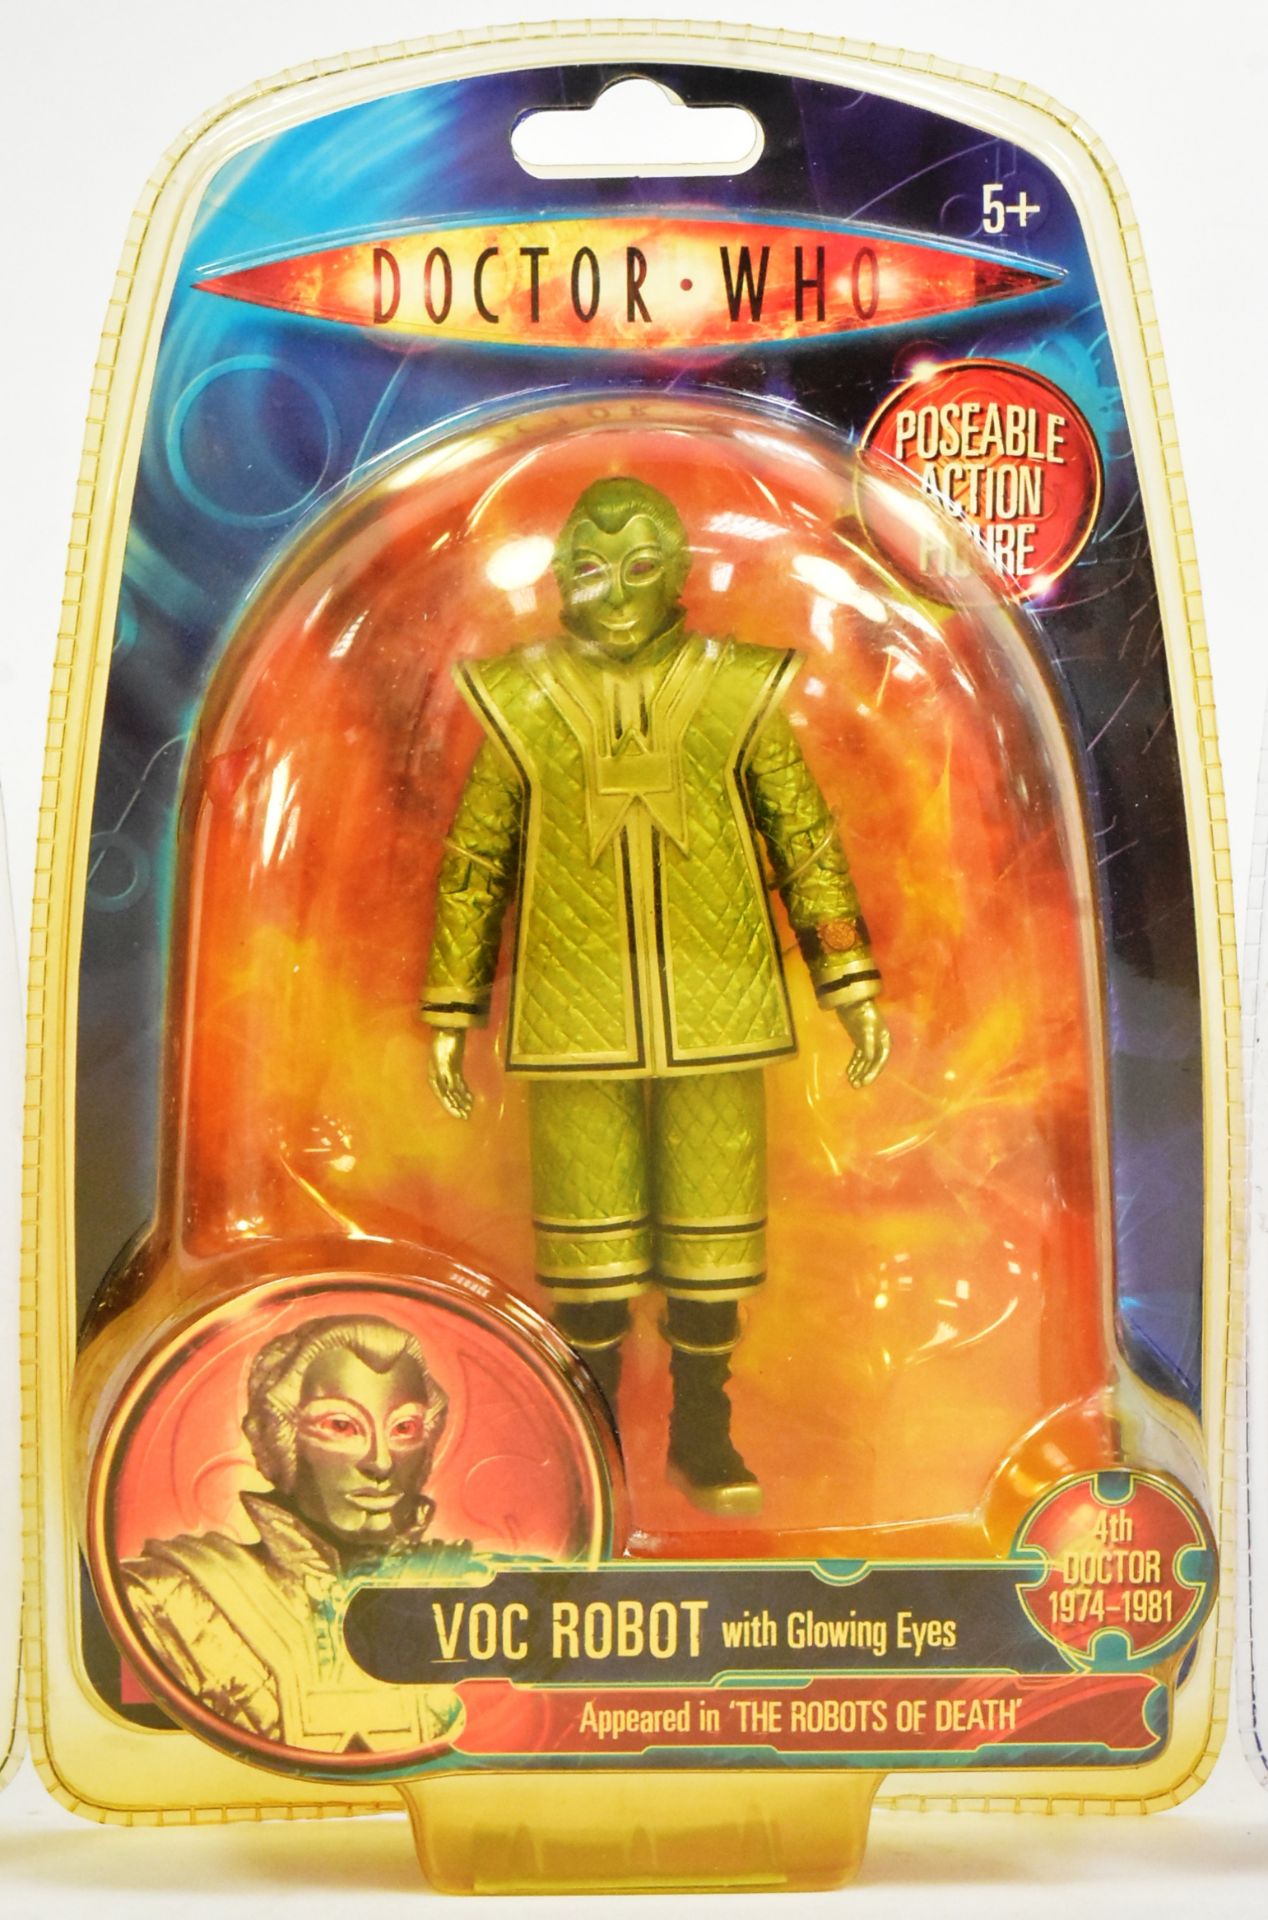 DOCTOR WHO - CHARACTER OPTIONS - VOC ROBOT ACTION FIGURES - Image 3 of 5